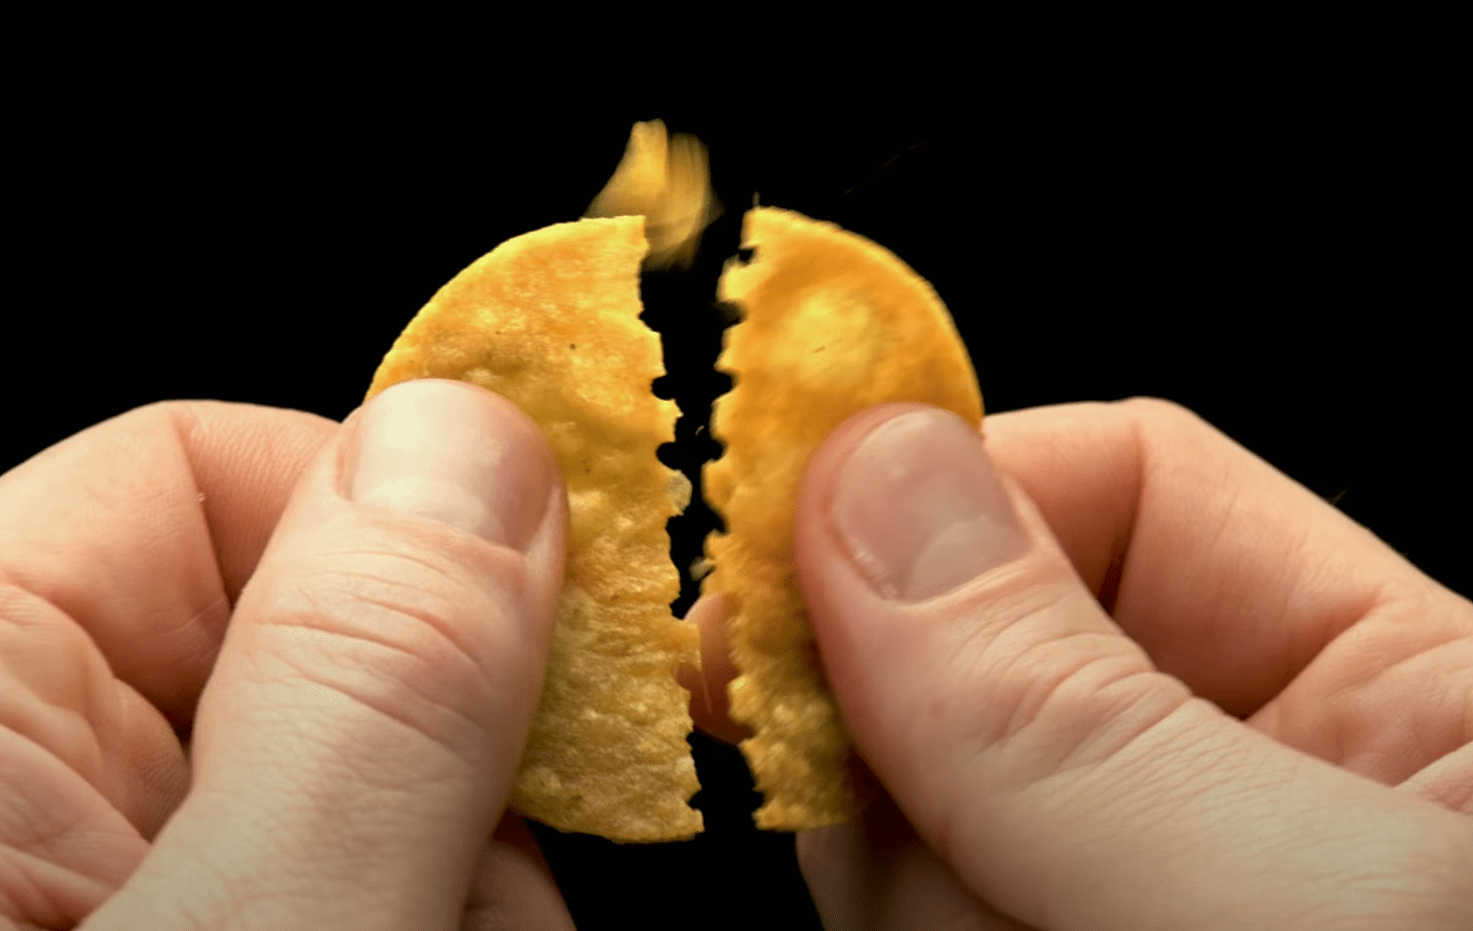 The makers of Hormel Chili launched Double Dippable Chips — “breakable” chips designed to allow people to double-dip into their favorite dips. (Hormel Foods, LLC)